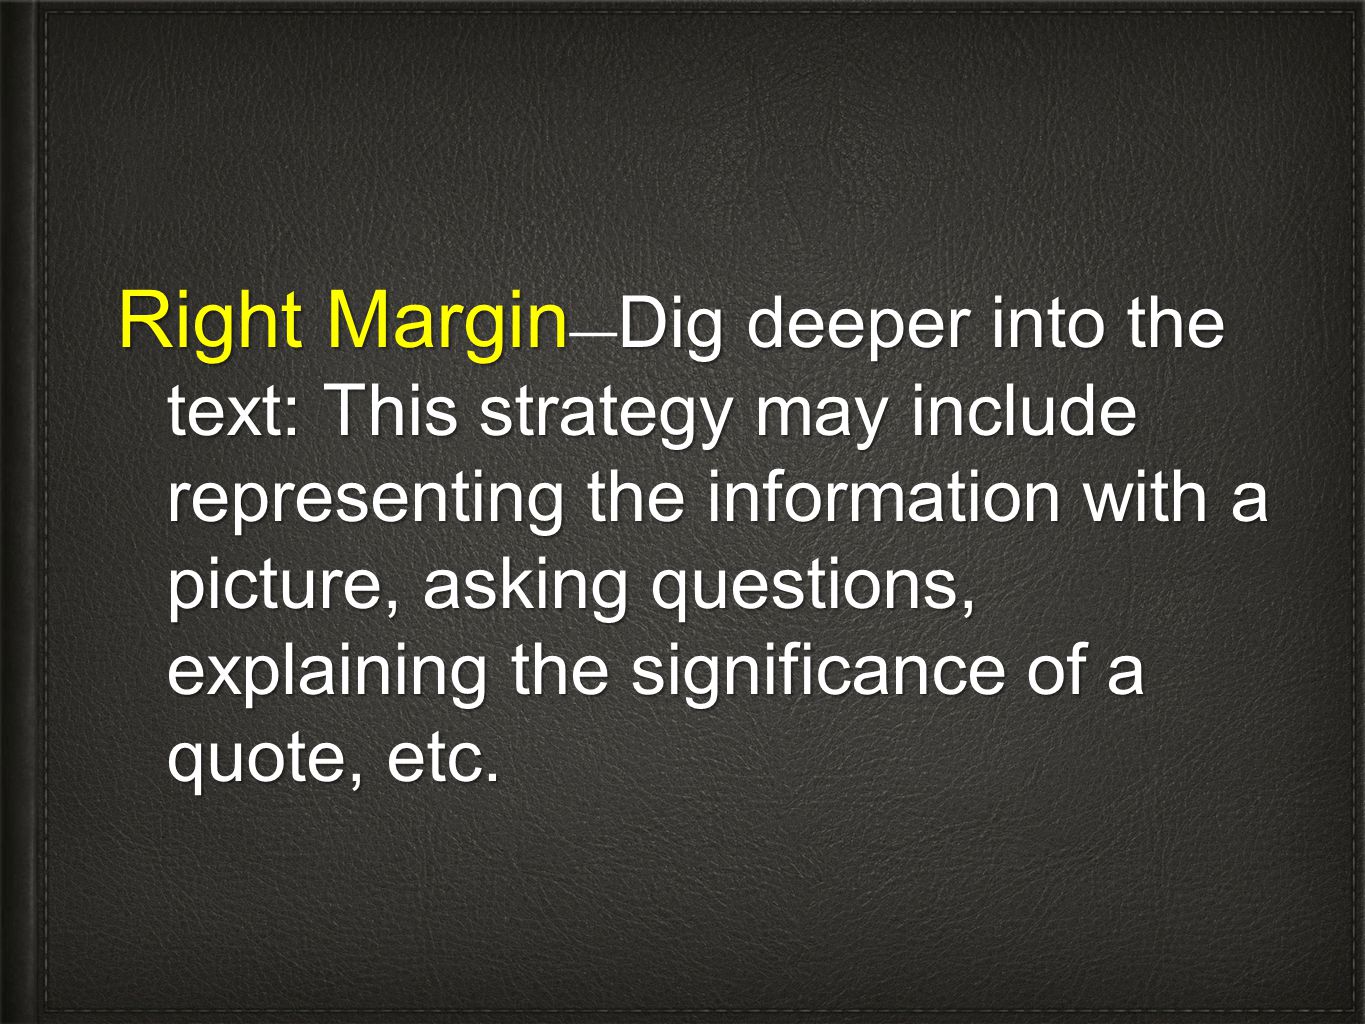 Right Margin—Dig deeper into the text: This strategy may include representing the information with a picture, asking questions, explaining the significance of a quote, etc.